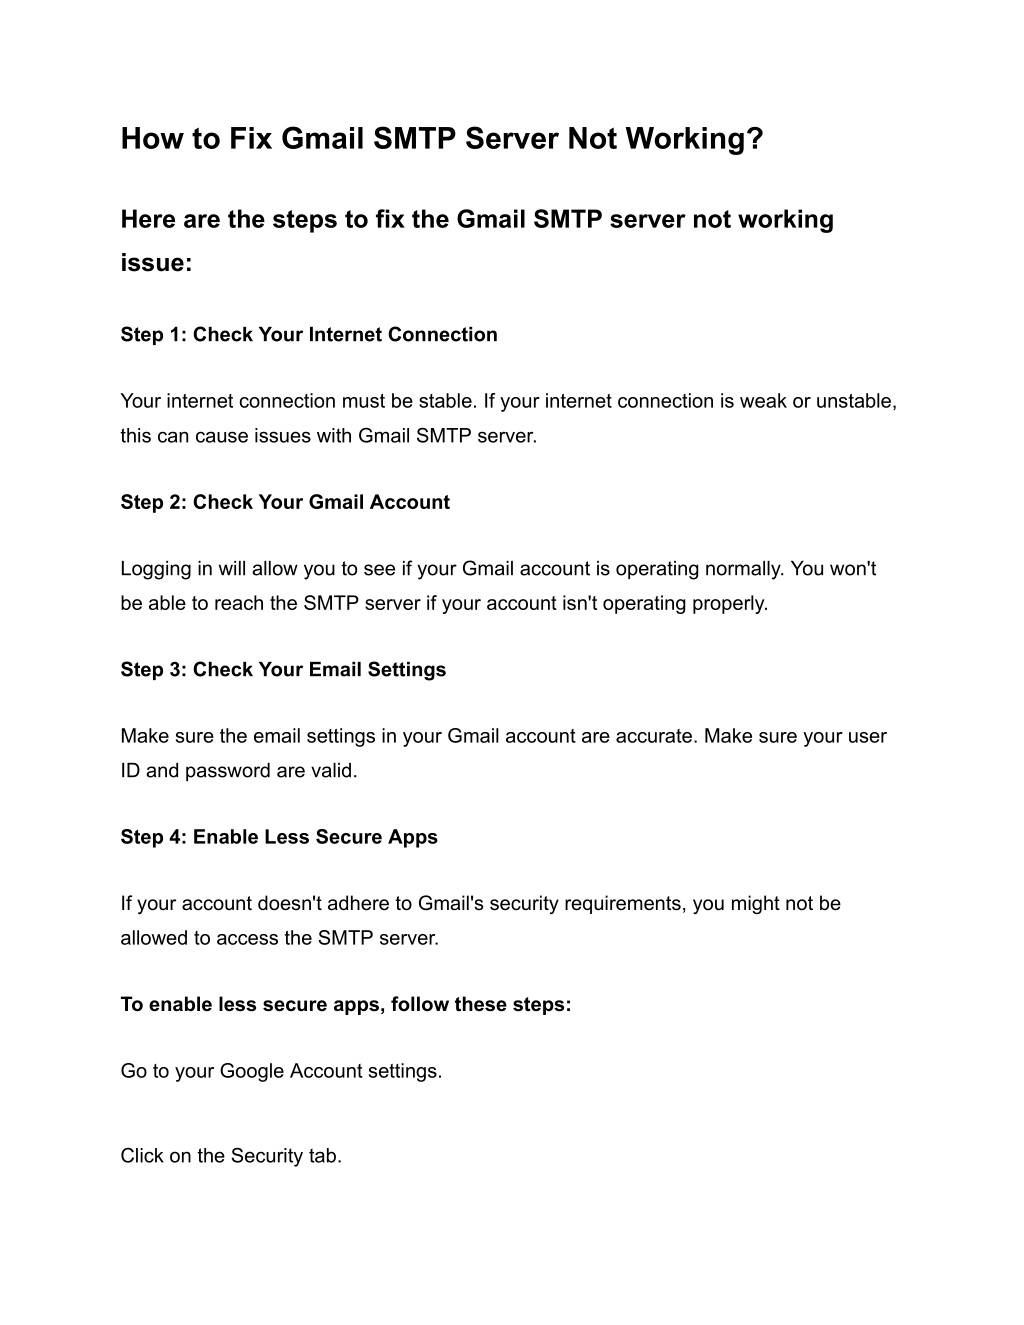 PPT Troubleshooting Guide_ Gmail SMTP Server Not Working PowerPoint